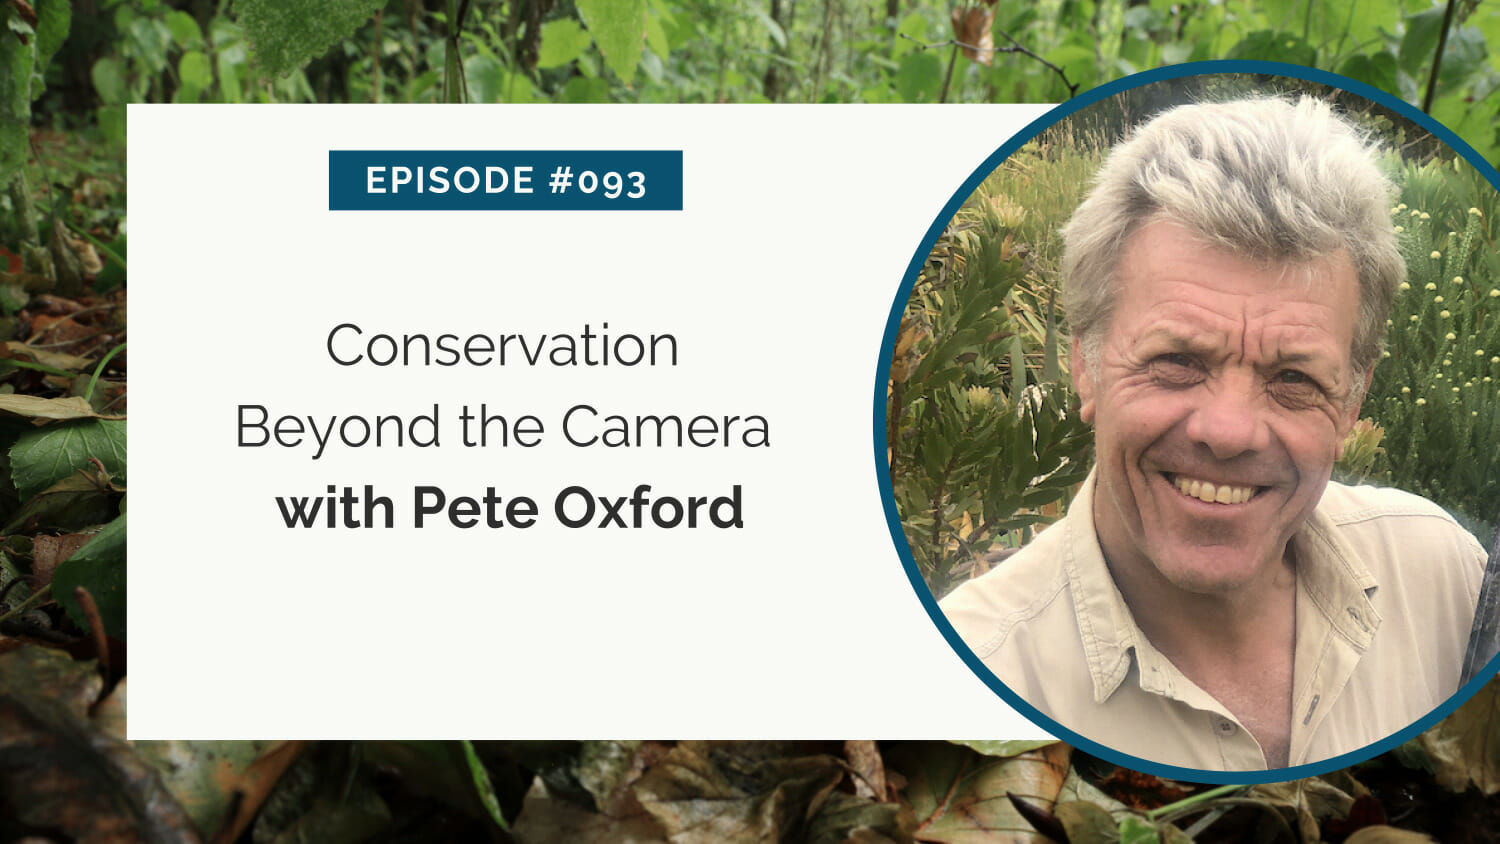 Podcast episode graphic featuring pete oxford discussing "conservation beyond the camera" in episode #093.